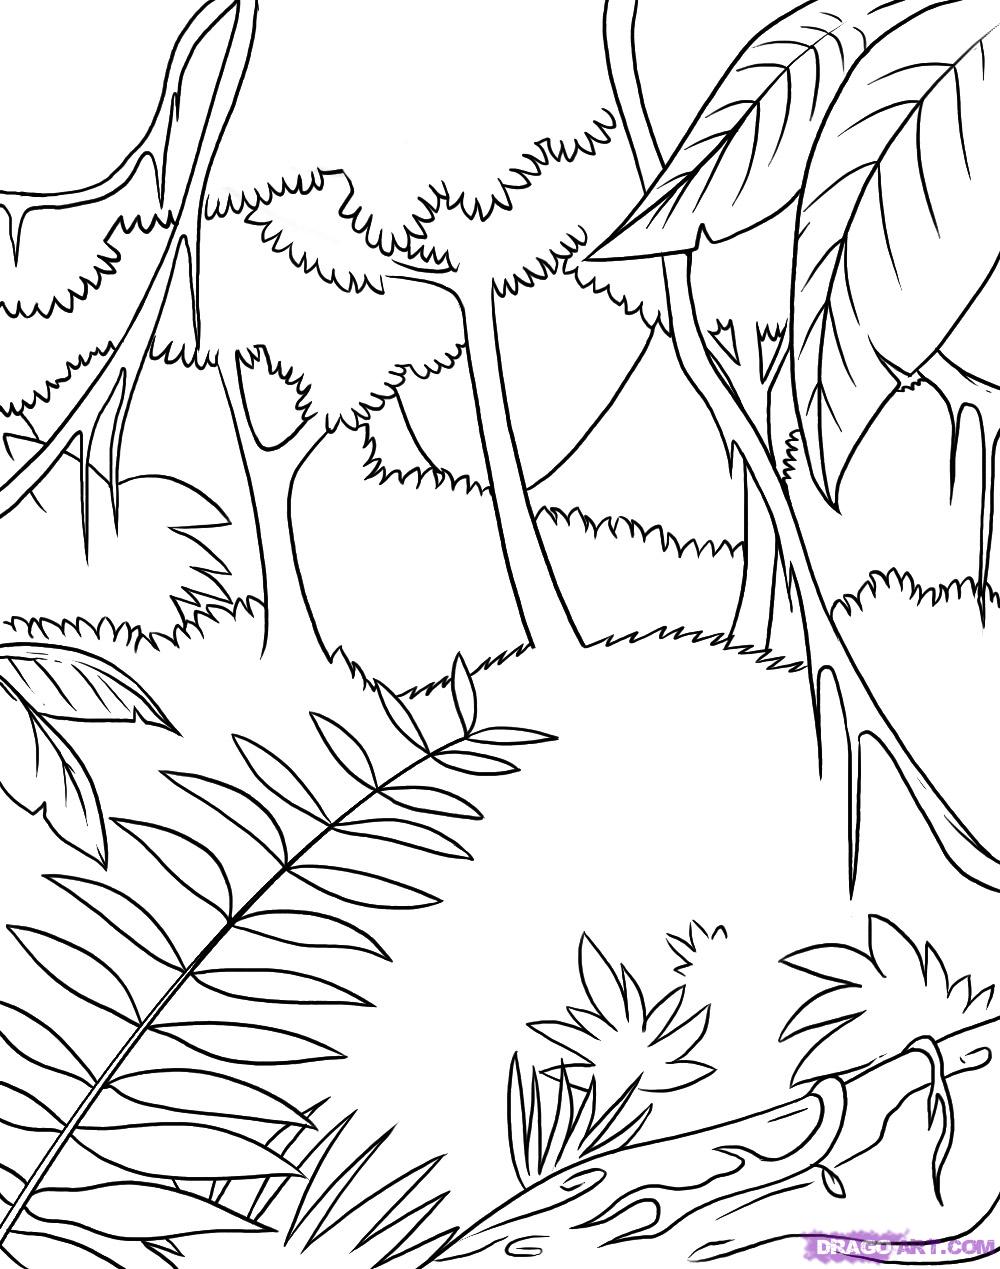 Download Jungle Coloring Pages (17) Coloring Kids - Coloring Kids